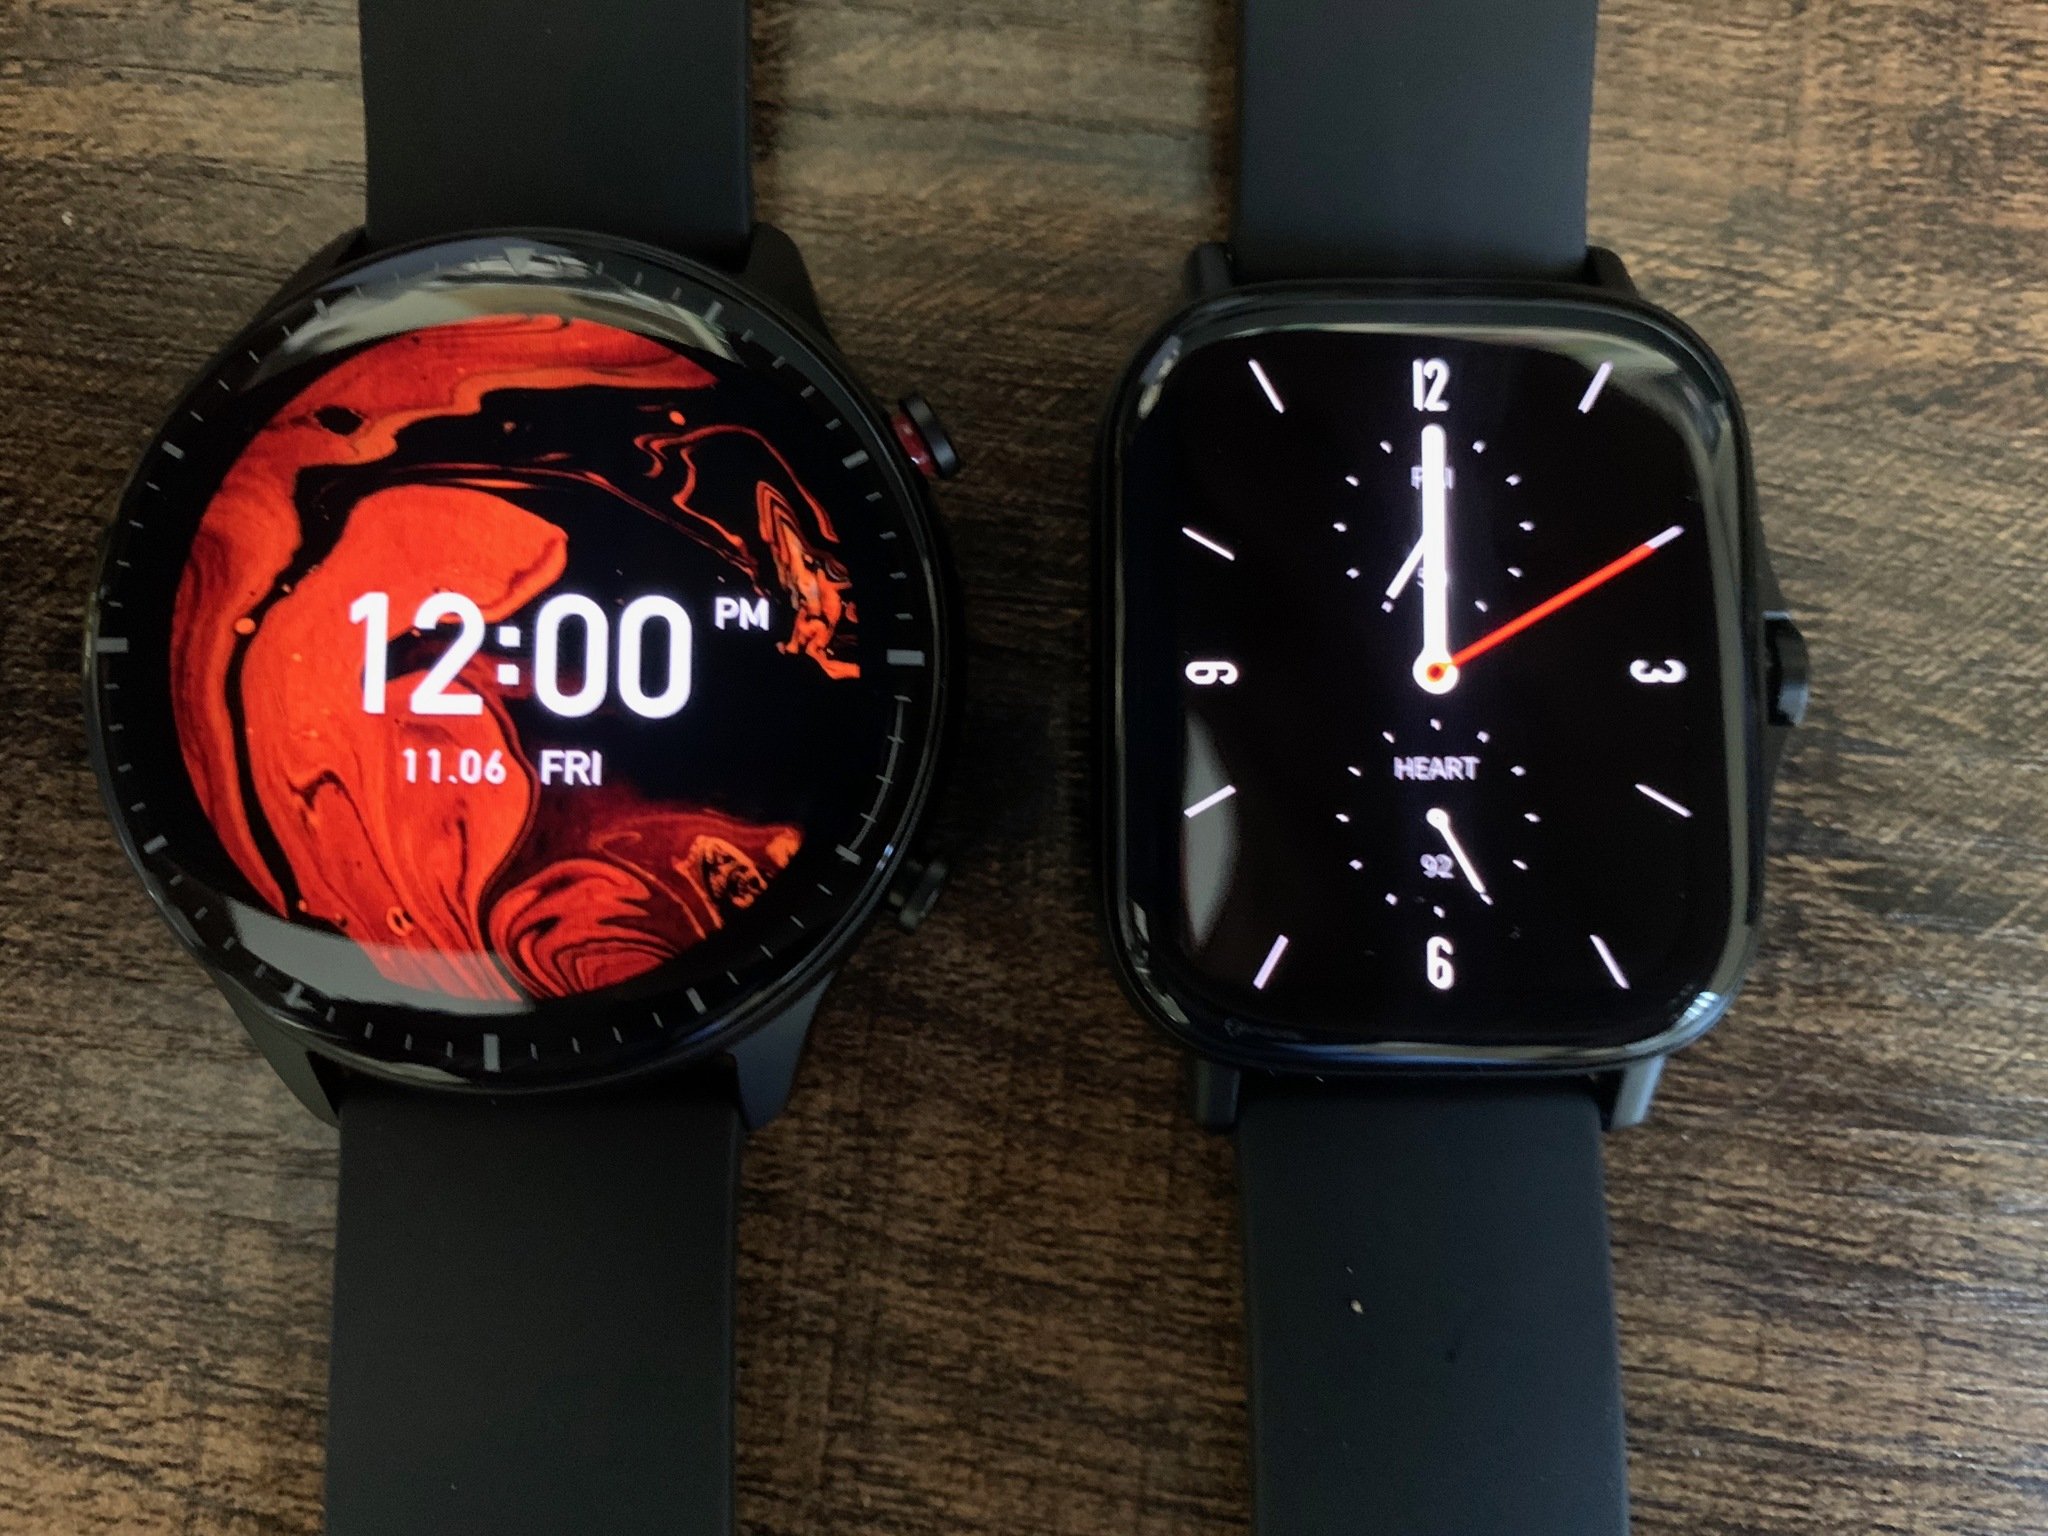 The Amazfit GTR 2 and GTS 2, side by side